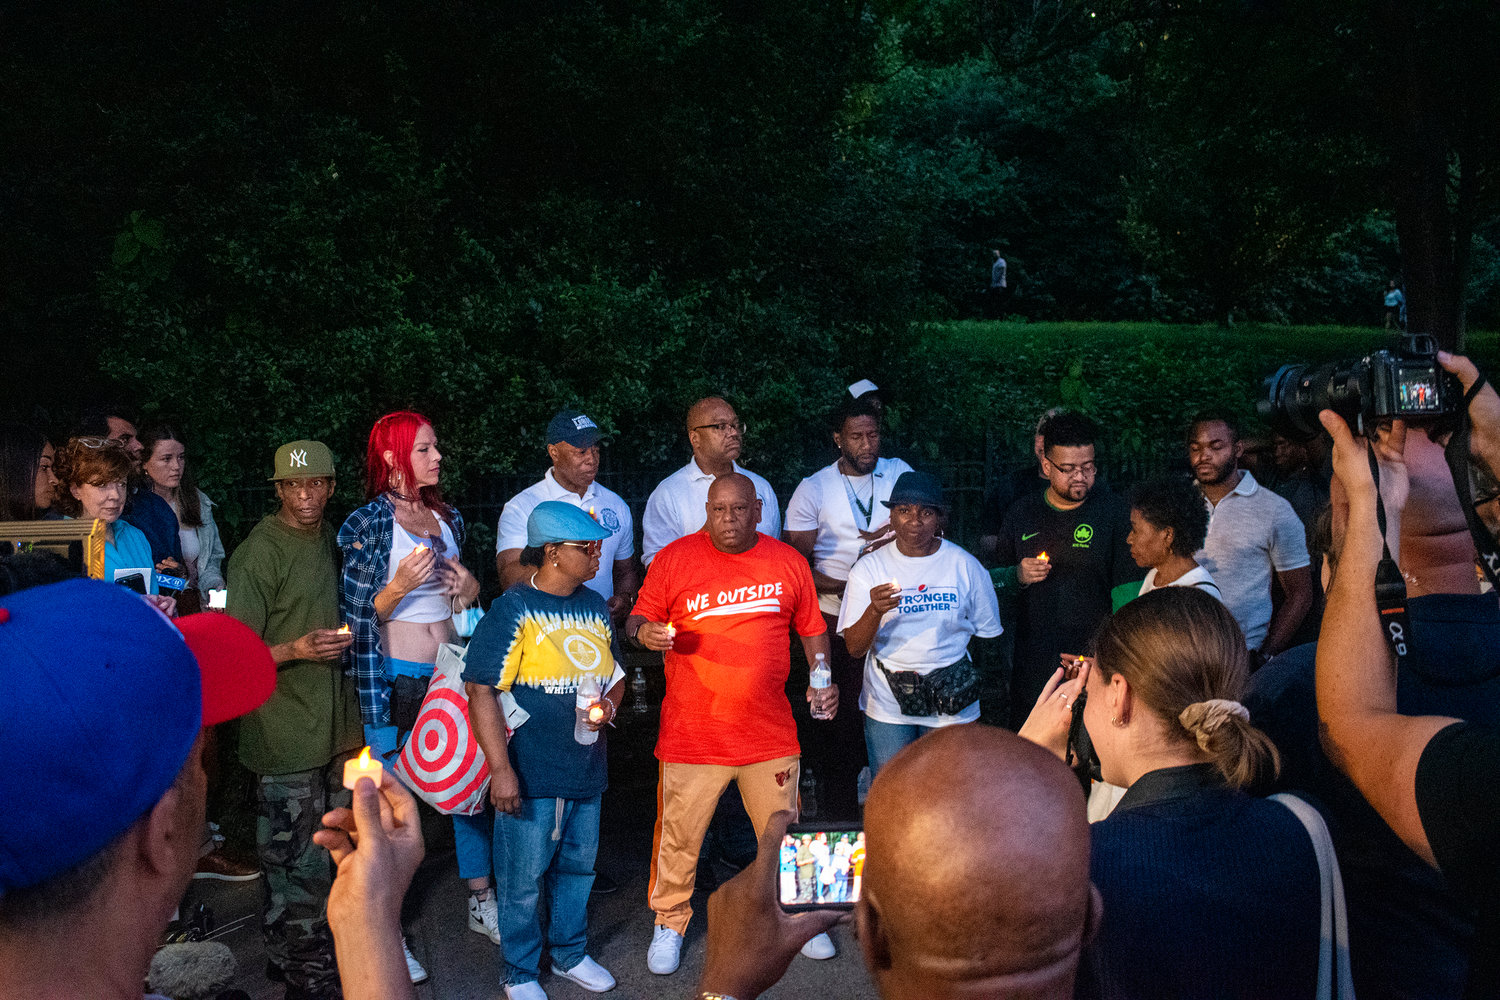 Faith leaders and electeds huddled together with others impacted by homelessness to pray for safety during the night ahead. A dozen people — nearly all currently without a home — settled to spend the night at Morningside Park last weekend.